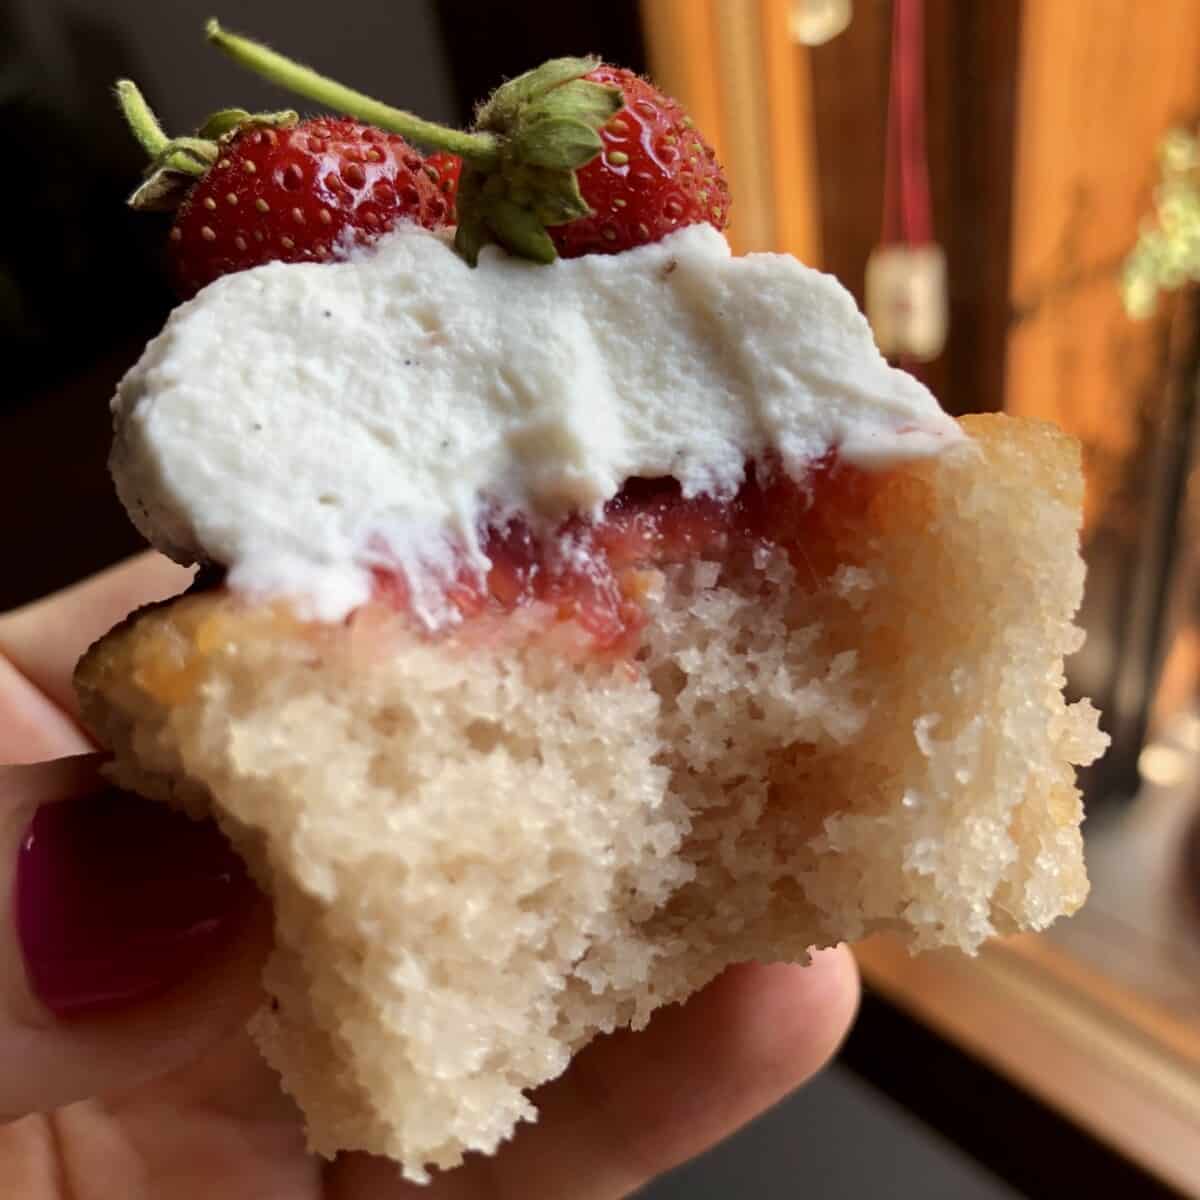 a single strawberry cupcake with strawberry gelée, strawberry vanilla bean whipped cream and baby wild Italian strawberries as garnish with a bite taken out revealing the super tender crumb.